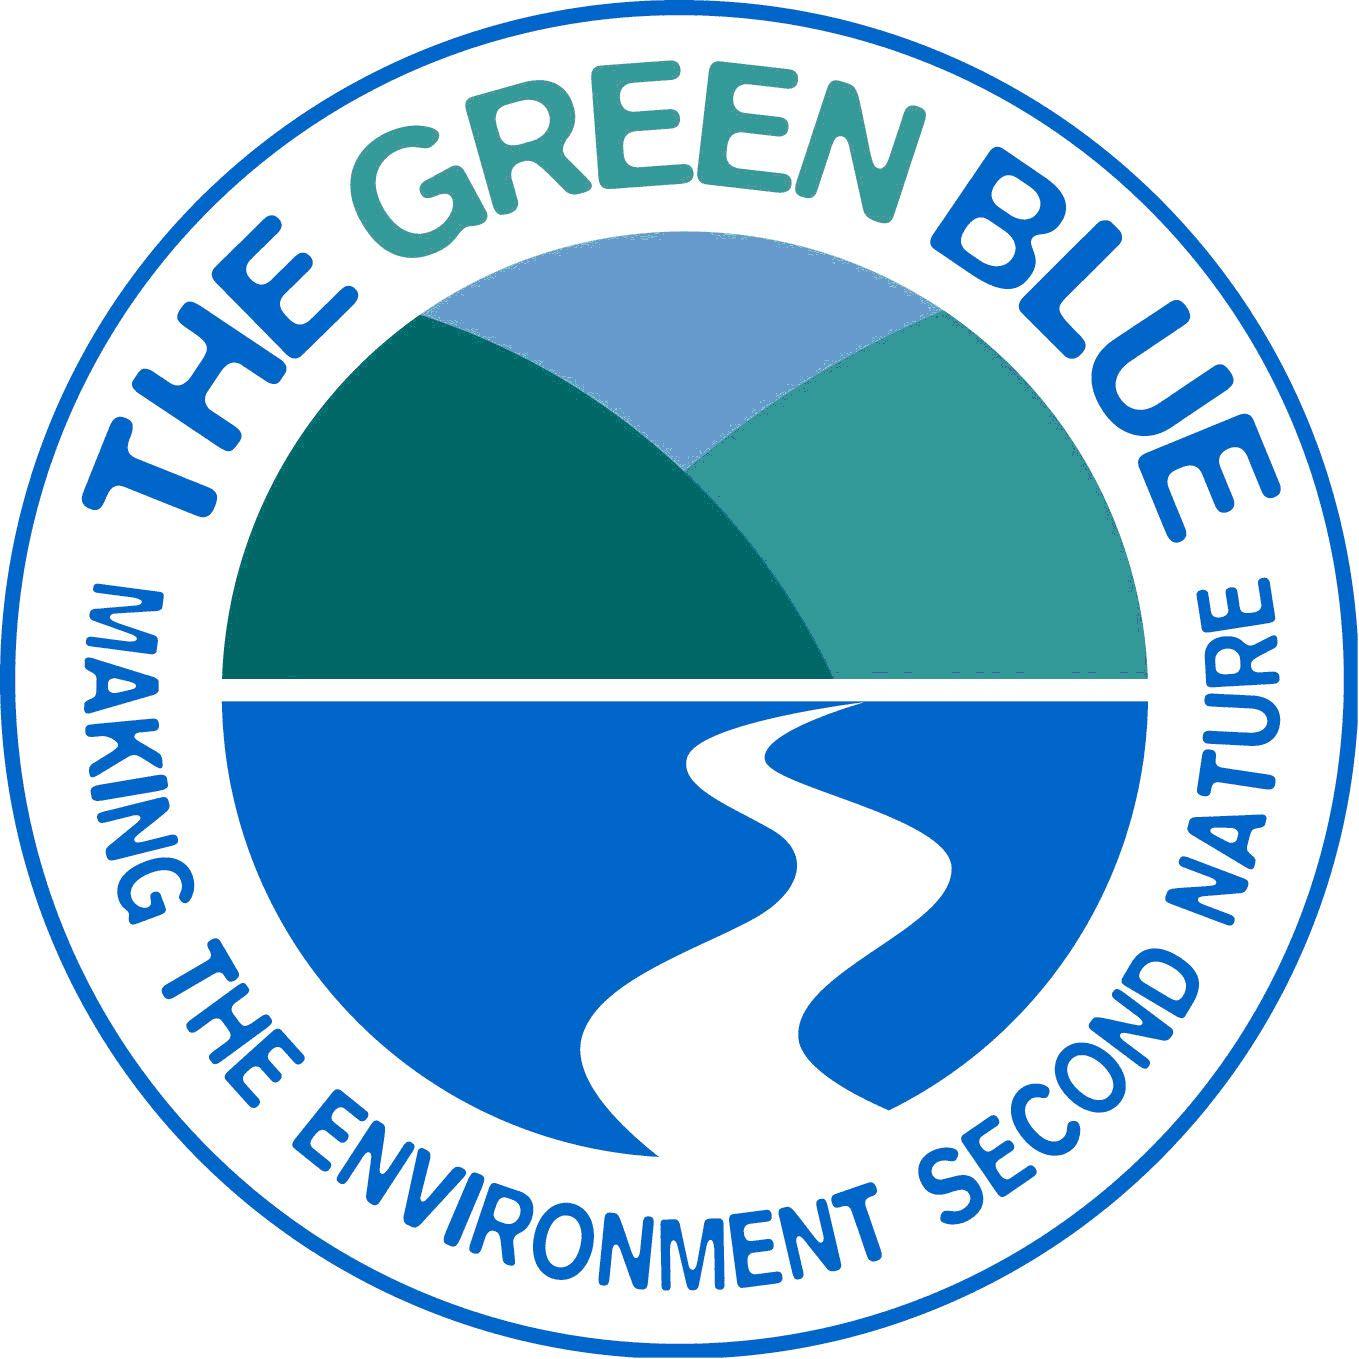 Green Boat Logo - The Green Blue Inland Boat Hire Guide - British Marine